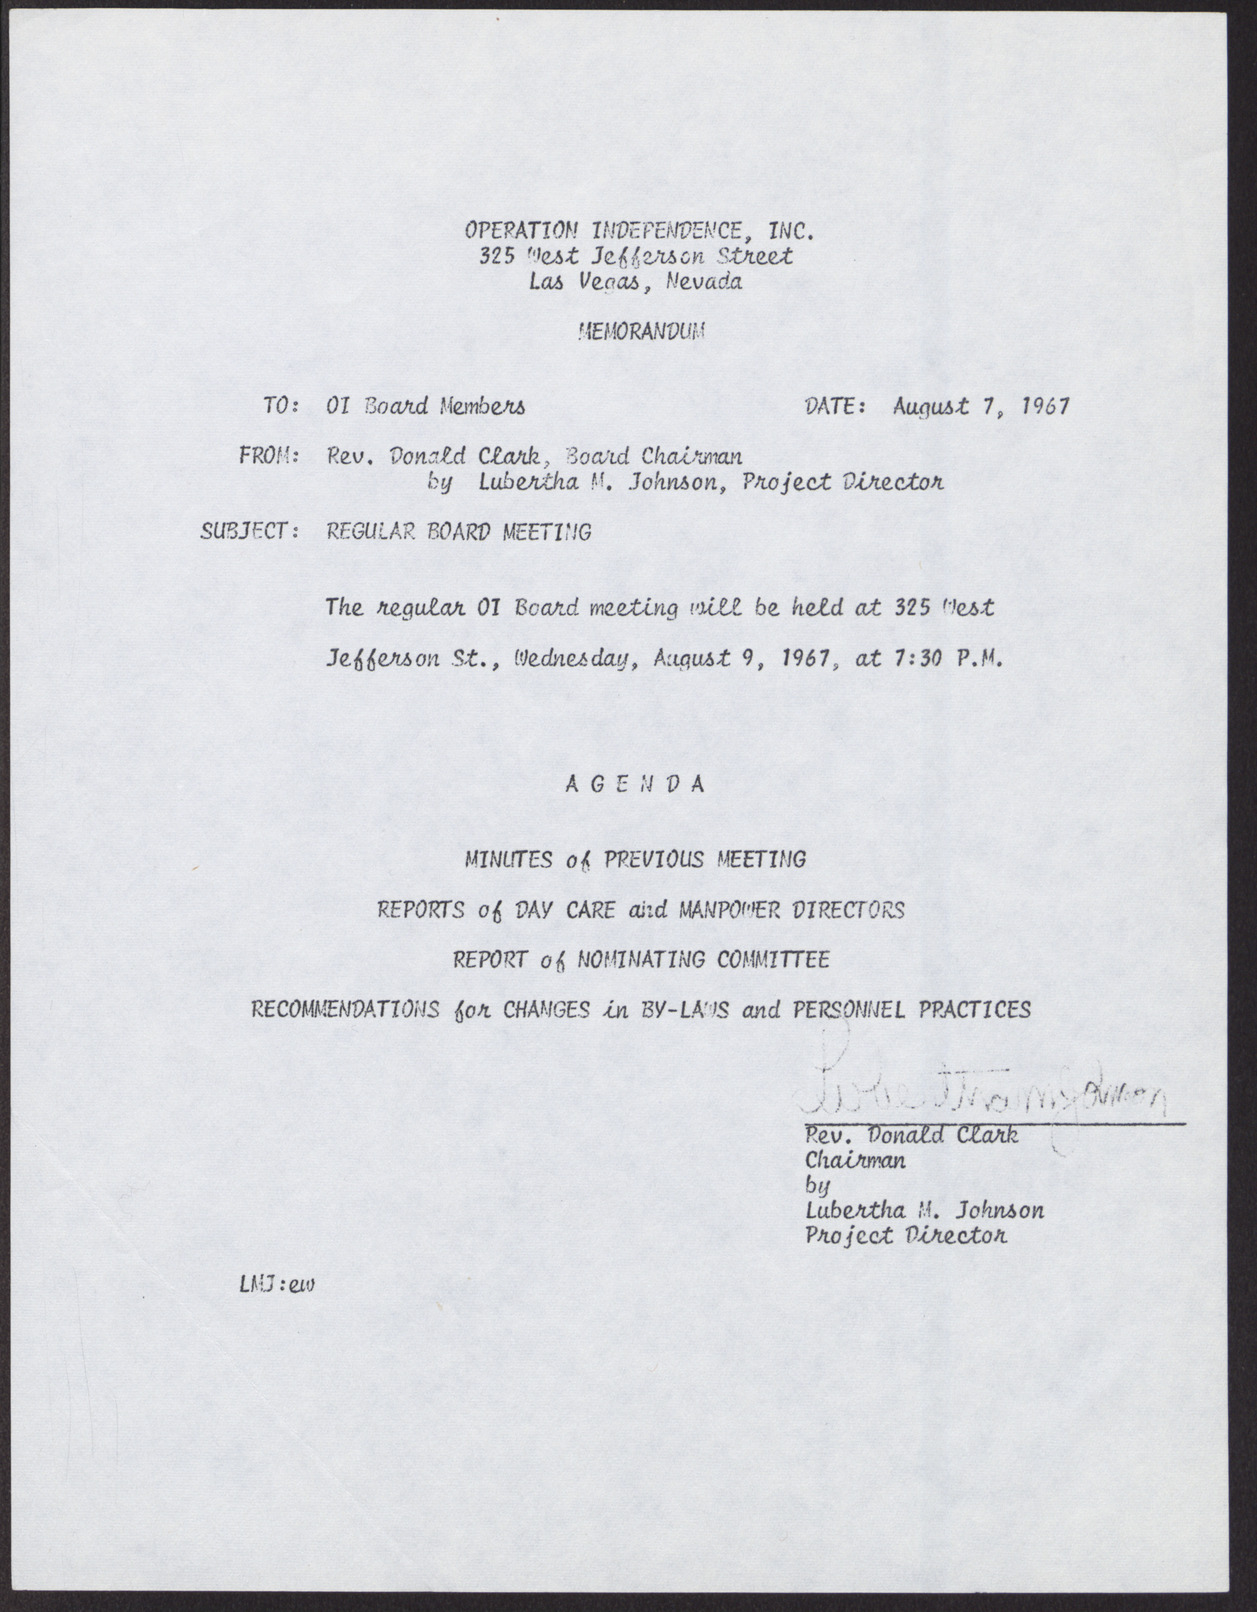 2 Copies of Memorandum to Operation Independence Board Members from Rev. Donald Clark by Lubertha M. Johnson, August 7, 1967